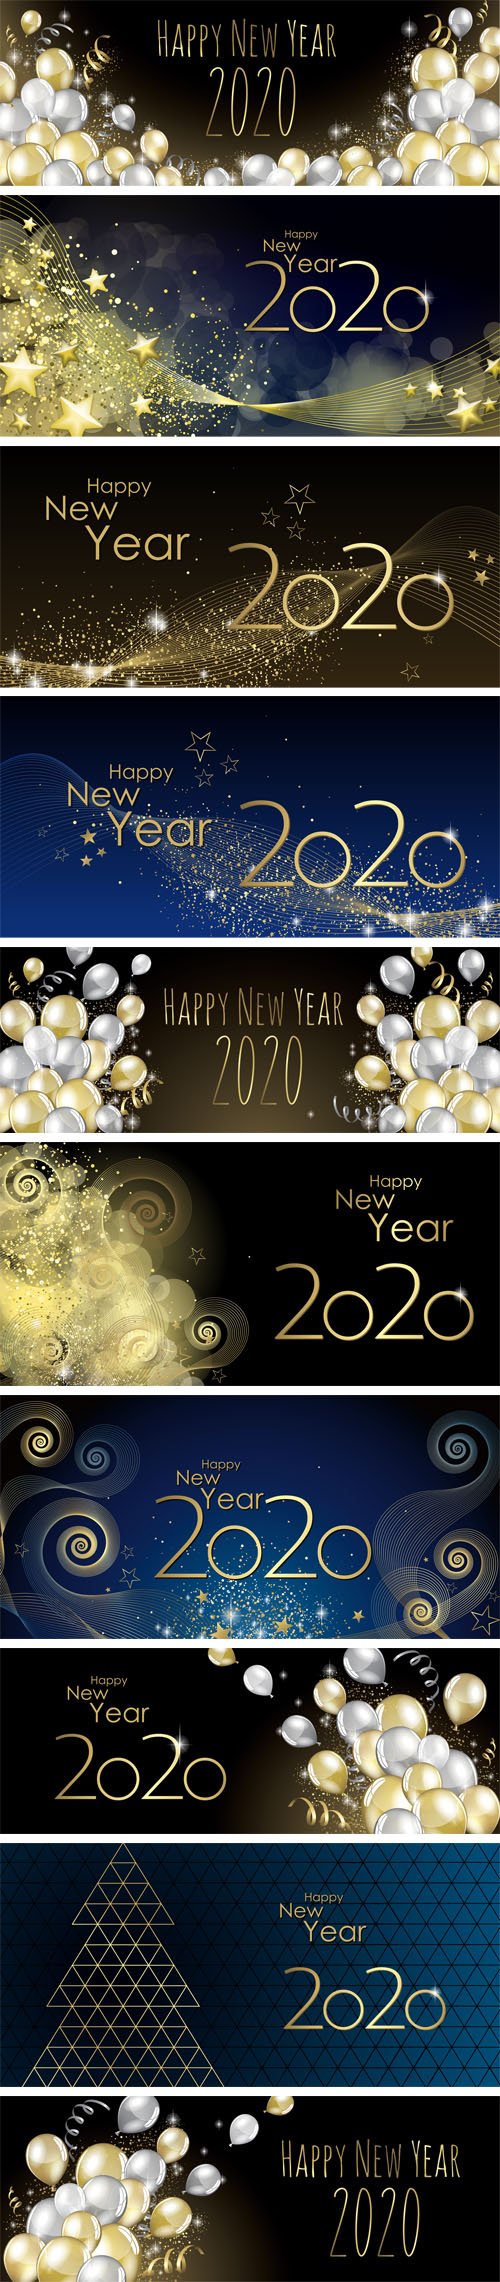 10 New Year 2020 Backgrounds Vector Collection 1